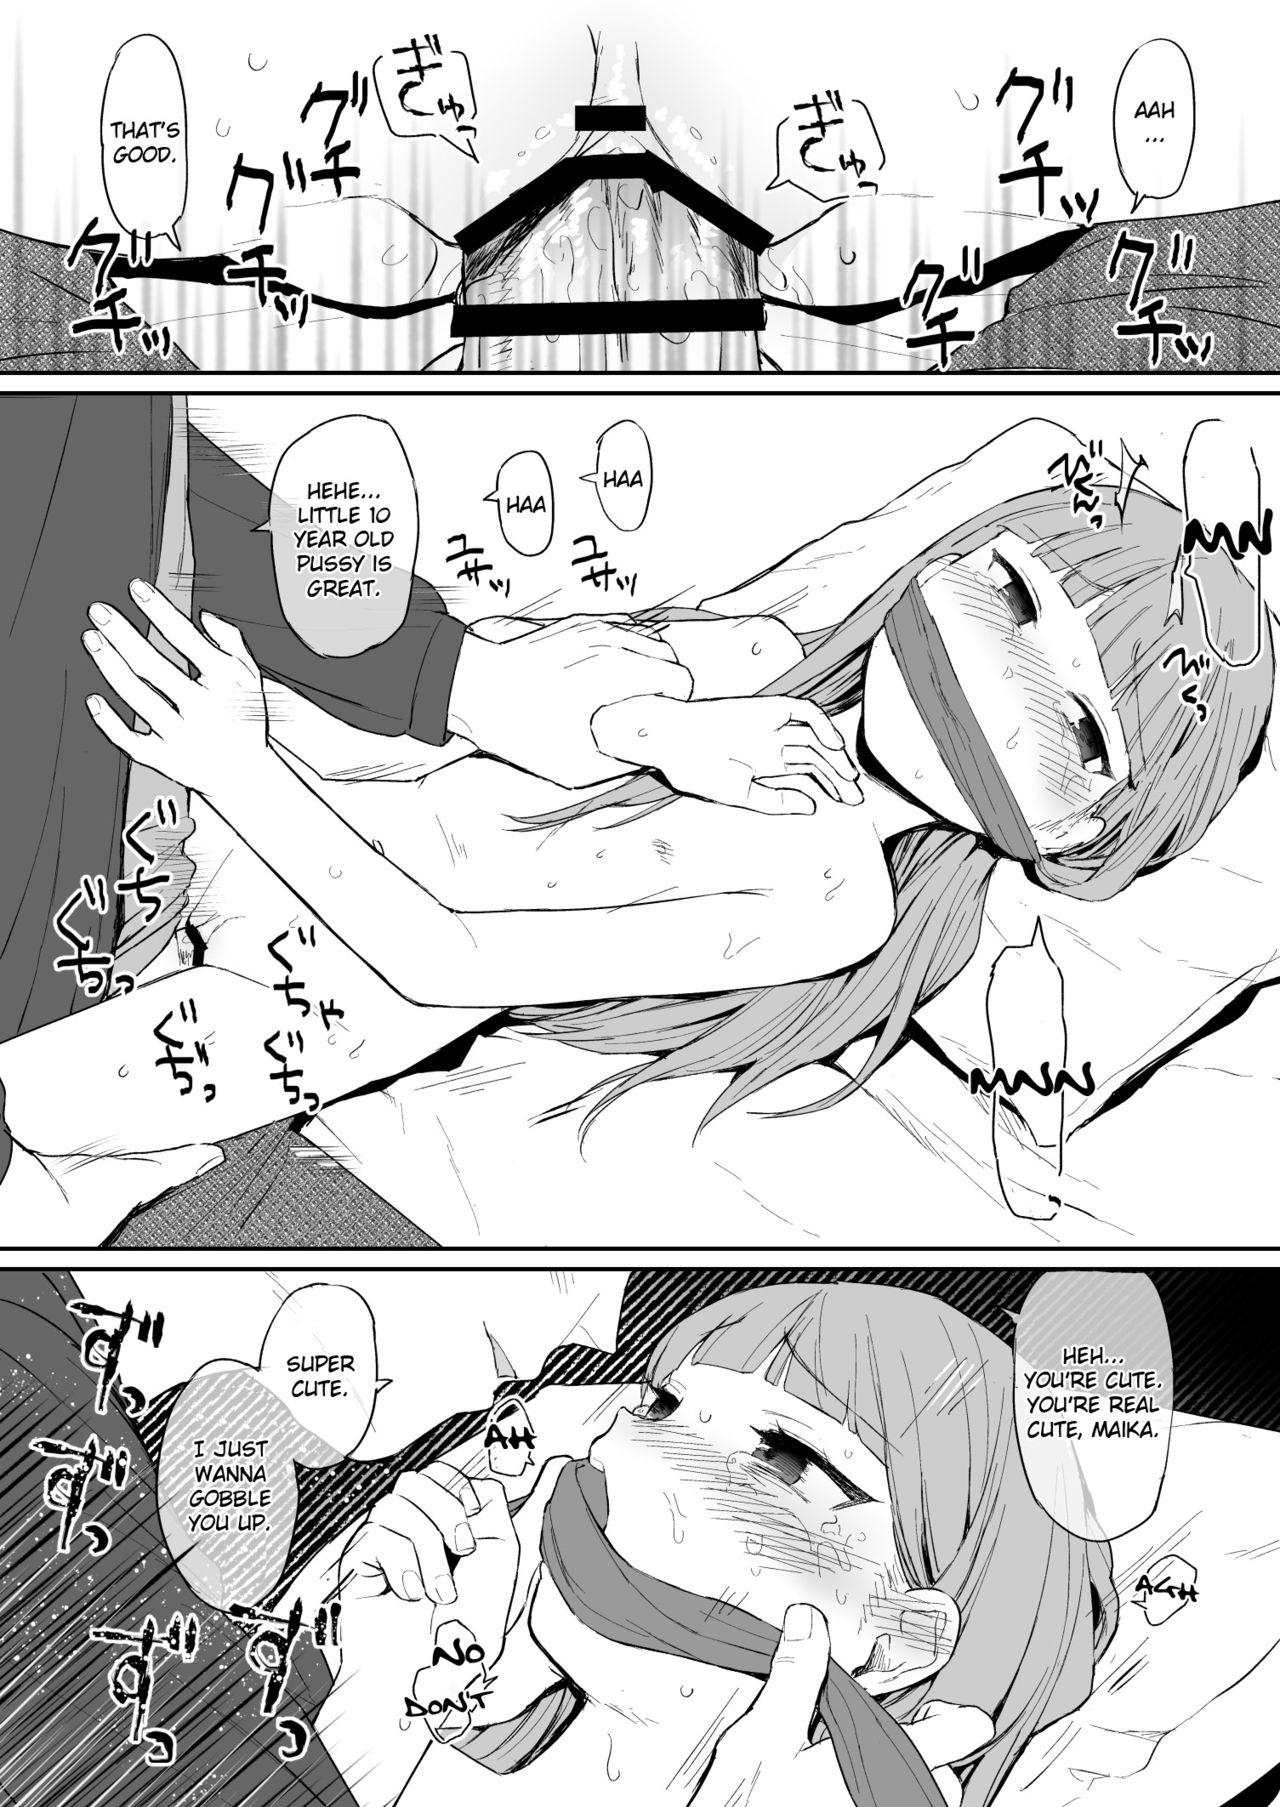 Foursome fragile - Original Foreplay - Page 7